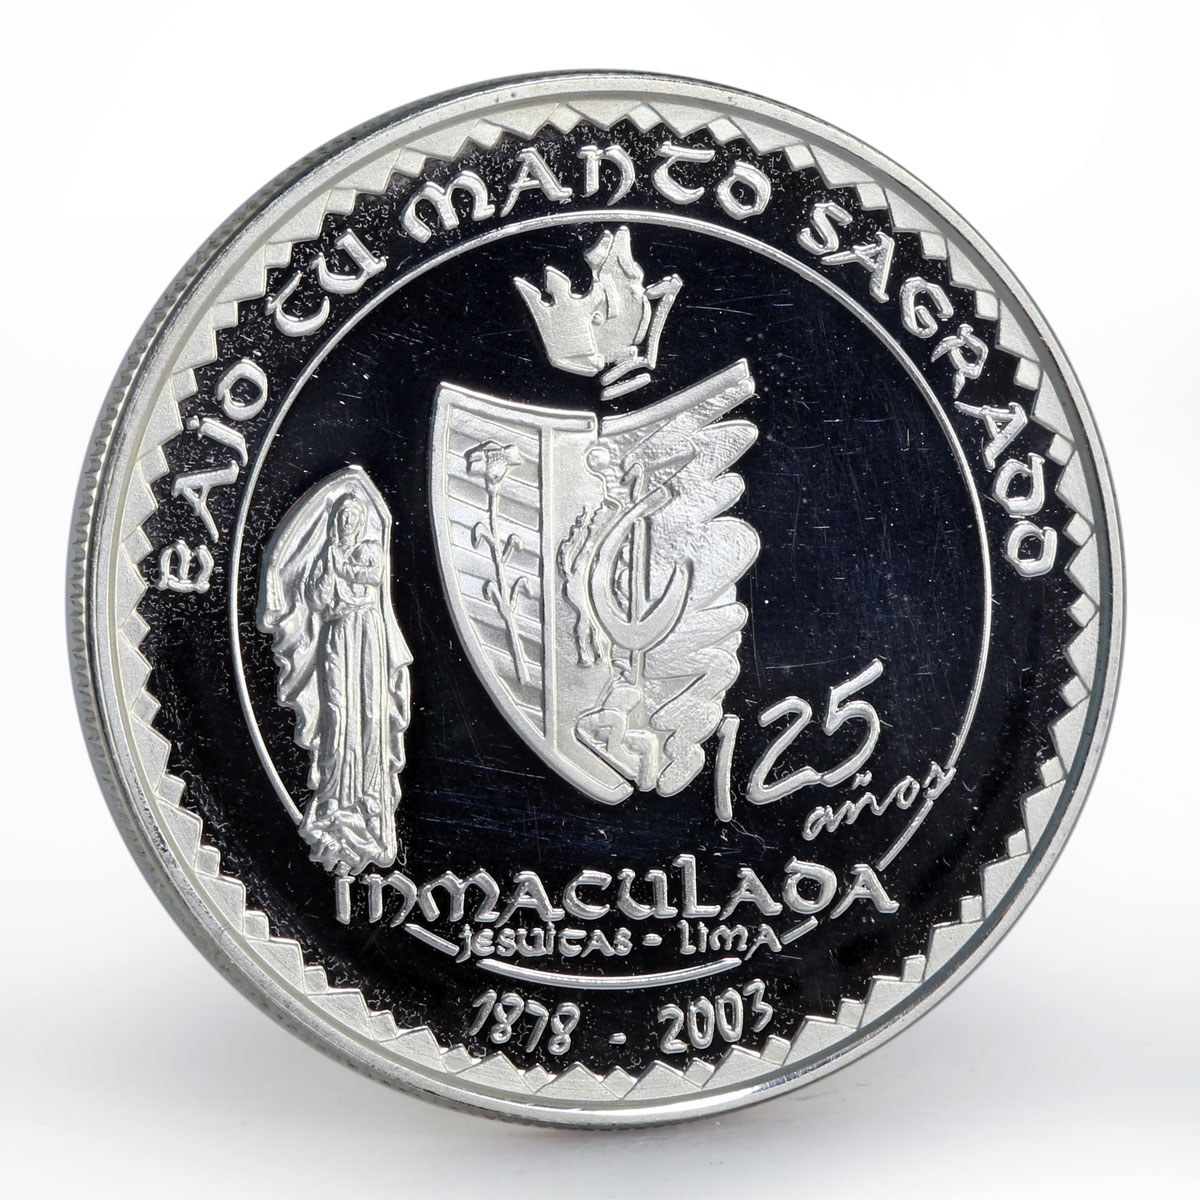 Peru 1 sol 125th Anniversary of the Inmaculate Jesuitas silver proof coin 2003